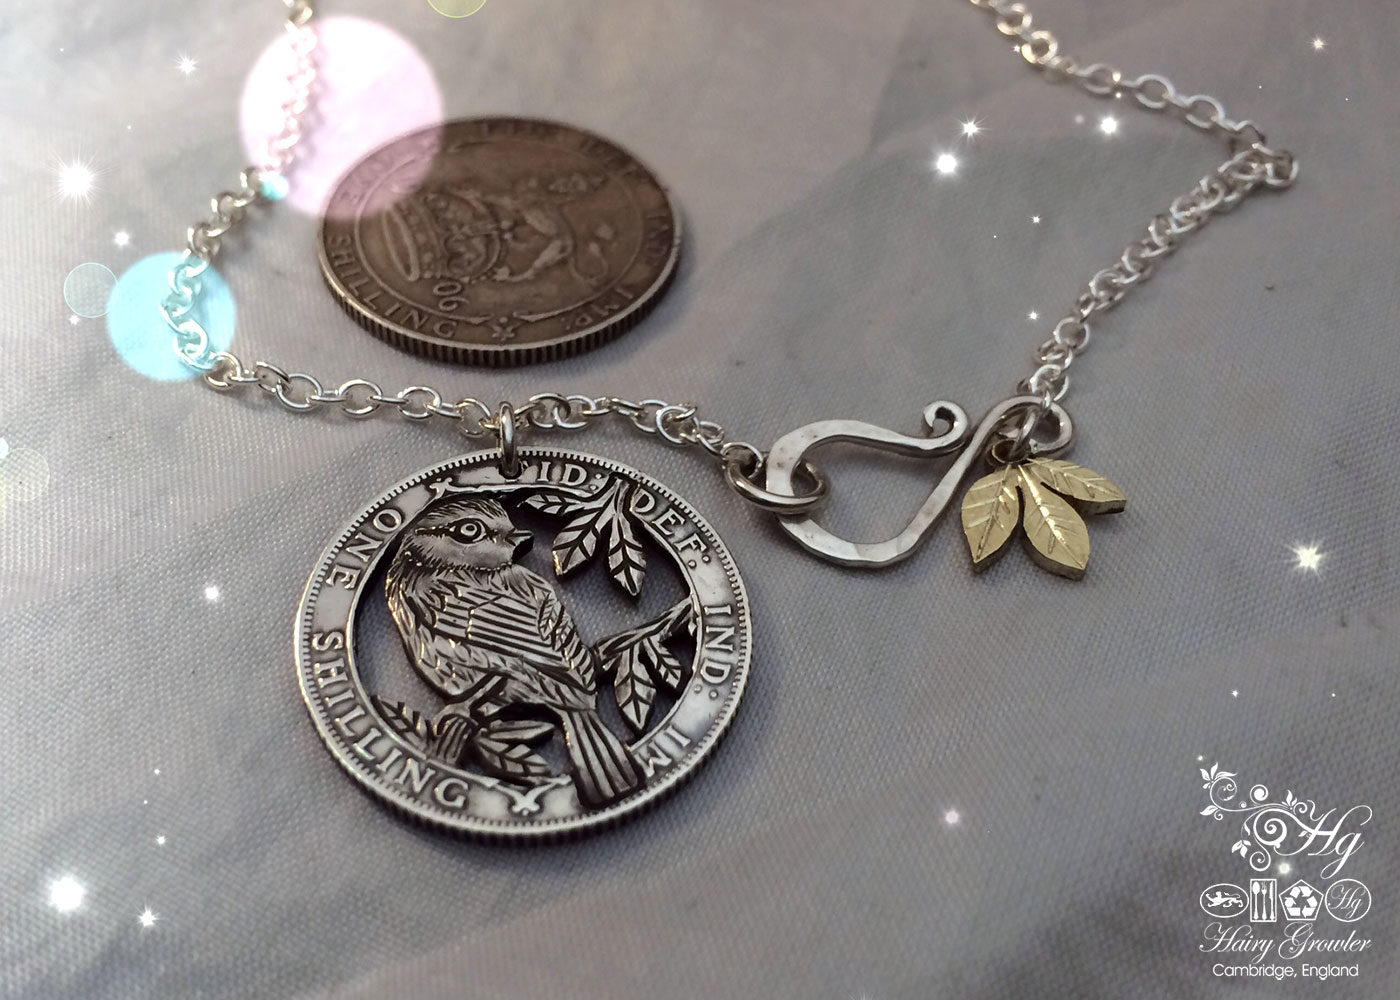 Hand made and repurposed silver shilling The Silver Shilling collection. silver blue-tit necklace totally handcrafted and recycled from old sterling silver shilling coins. Designed and created by Hairy Growler Jewellery, Cambridge, UK. necklace